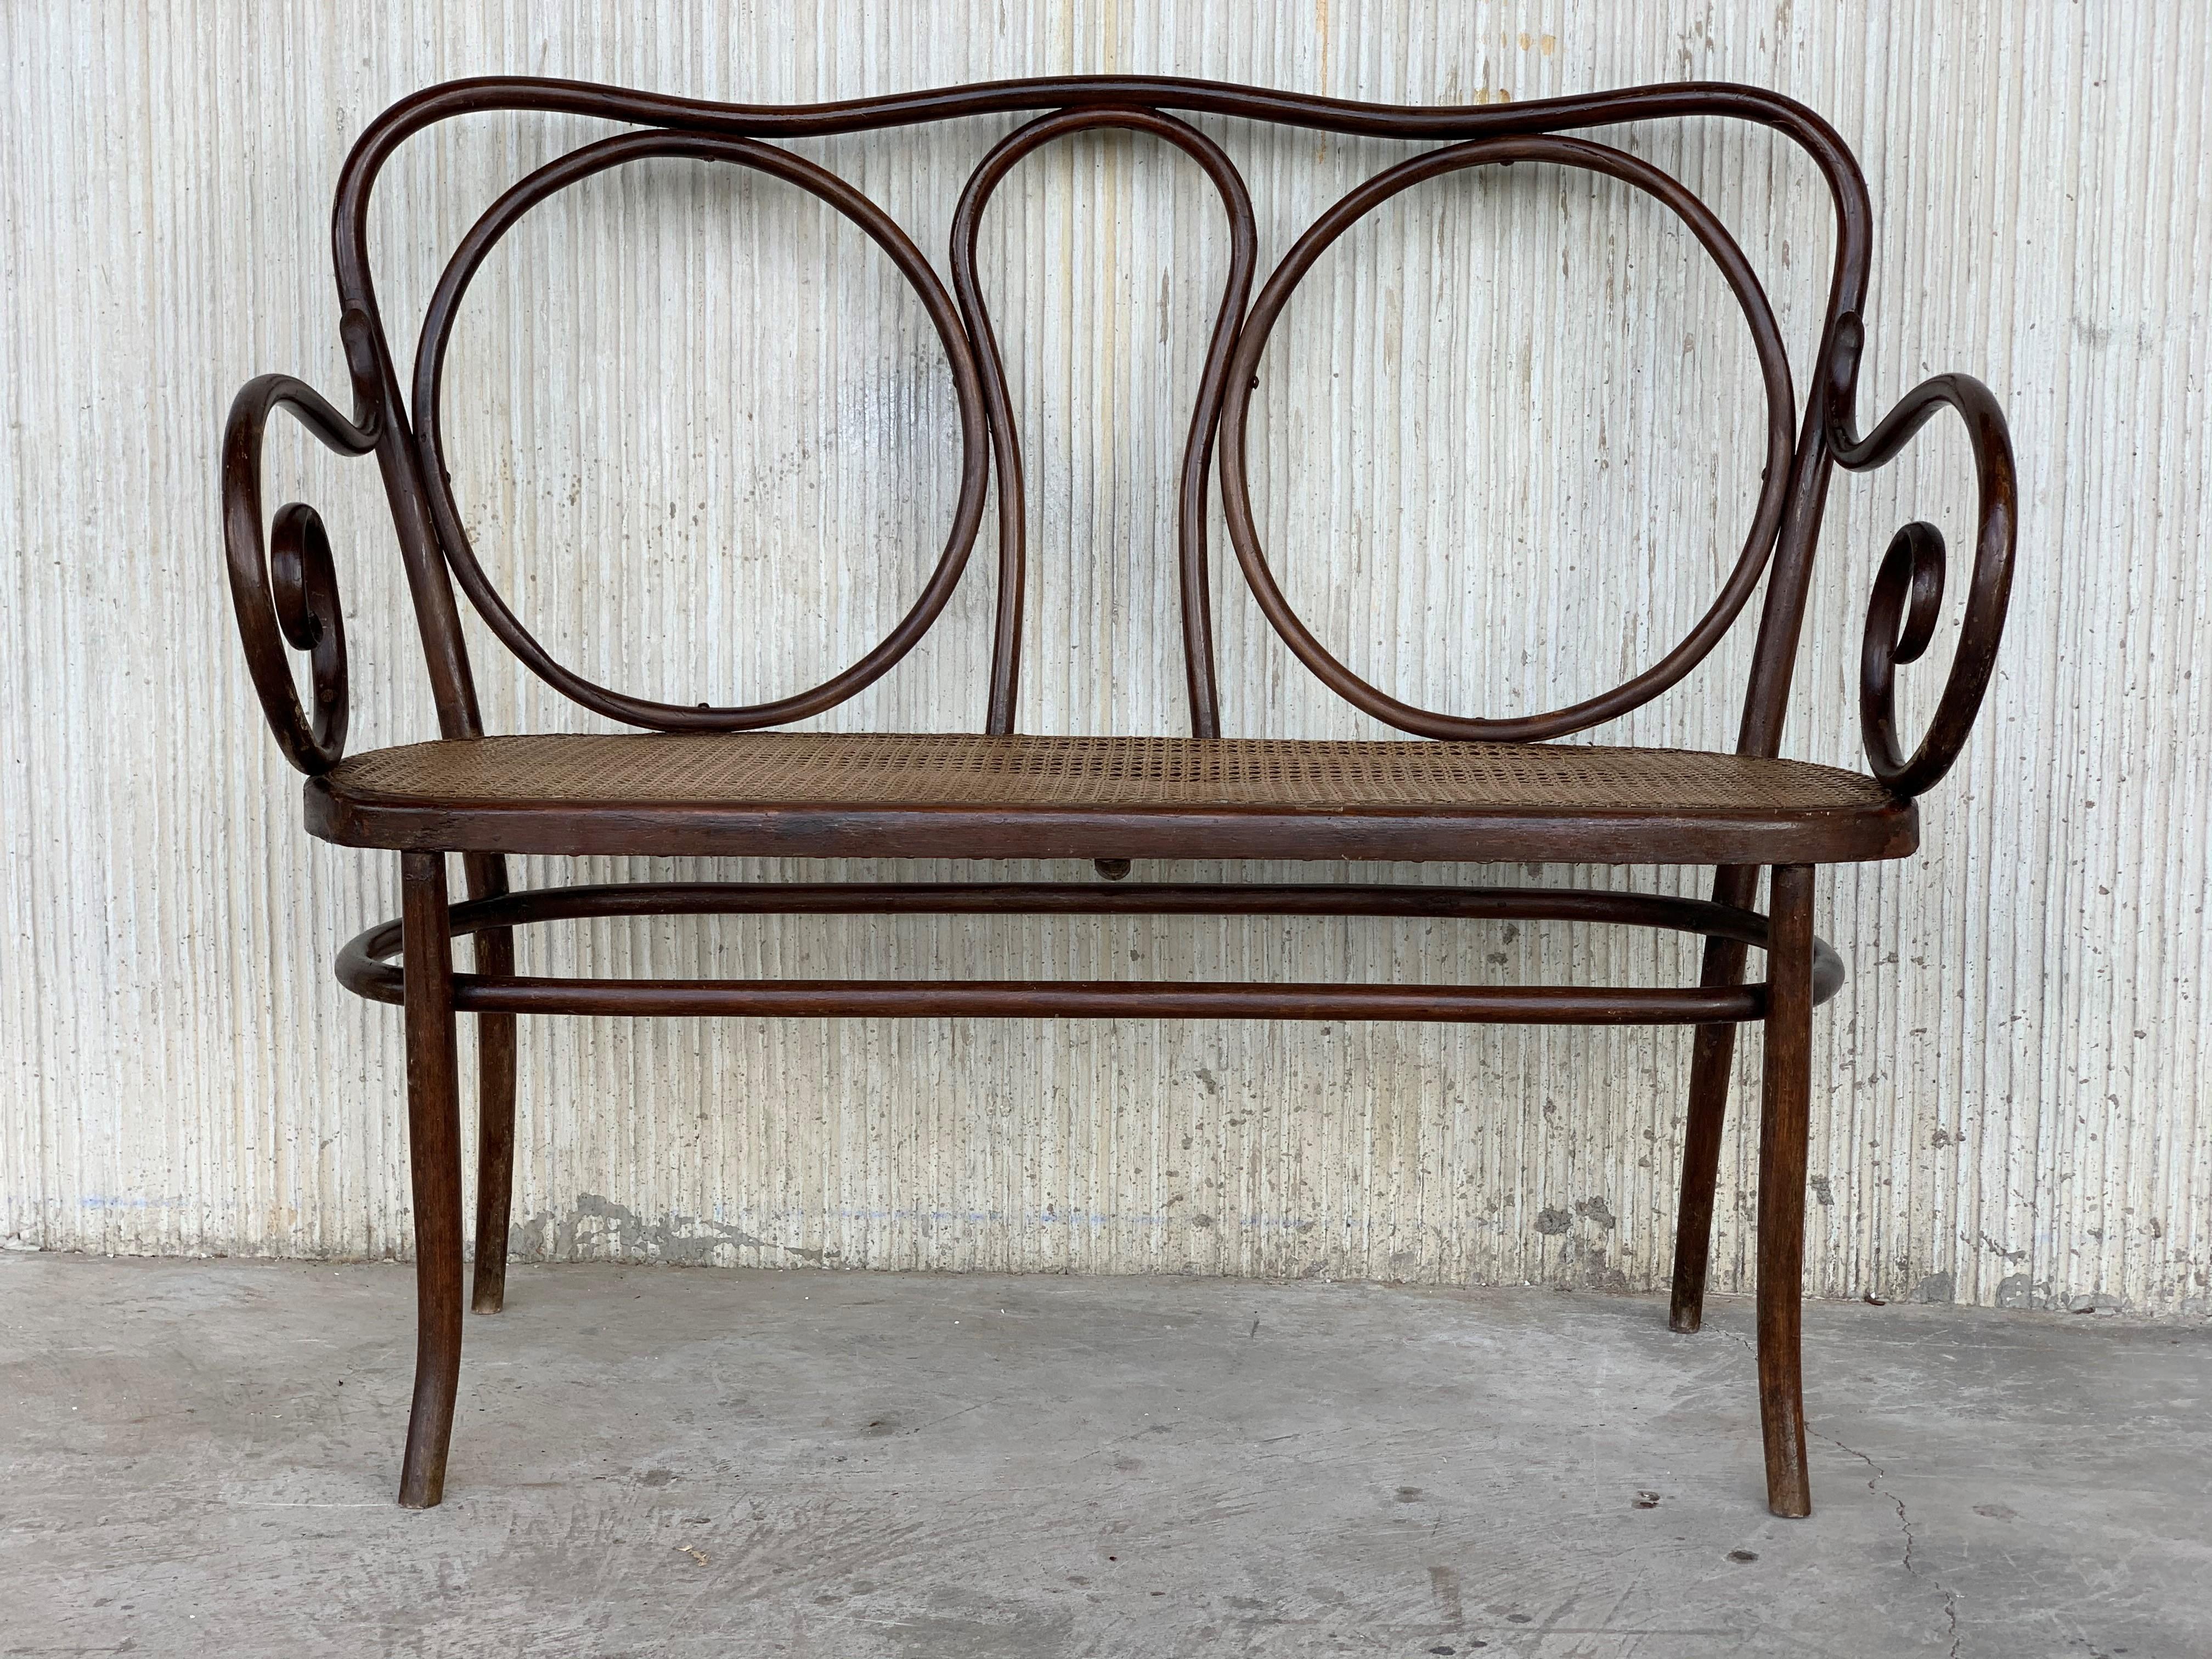 20th century bentwood sofa in the Thonet style, circa 1925, caned seat

This sofa it´s very heavy and sturdy.